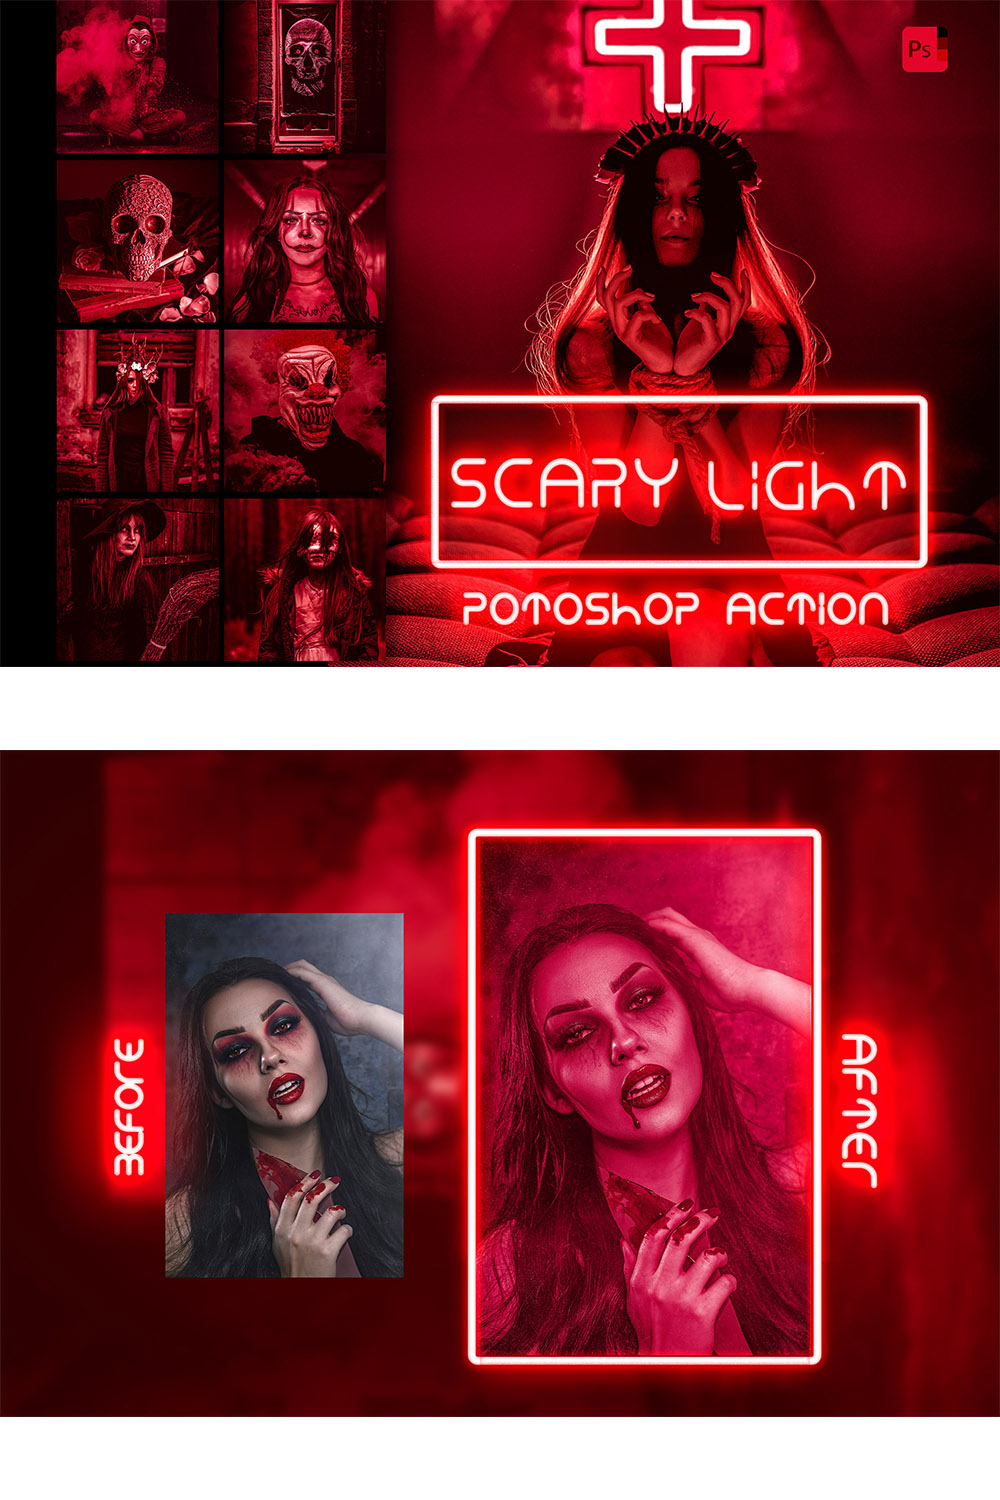 12 Photoshop Actions, Scary Light Ps Action, Spooky ACR Preset, Halloween Ps Filter, Atn Portrait And Lifestyle Theme For Instagram, Blogge pinterest preview image.